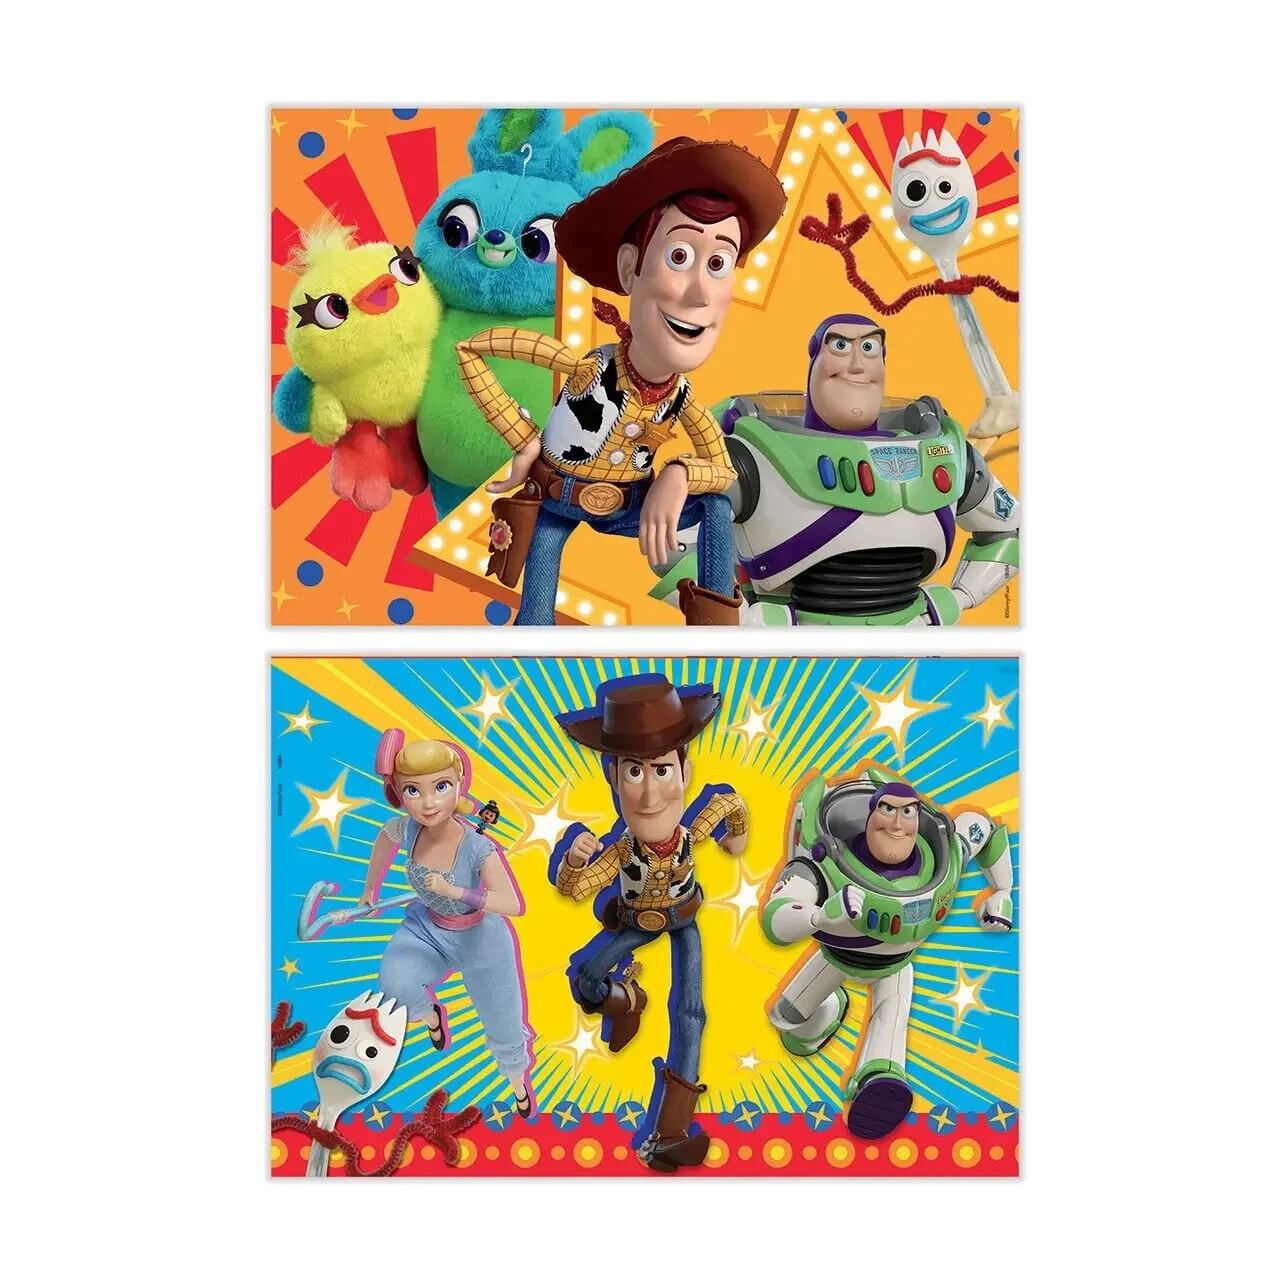 Holzpuzzle Toy Story 4 2x50 Teile